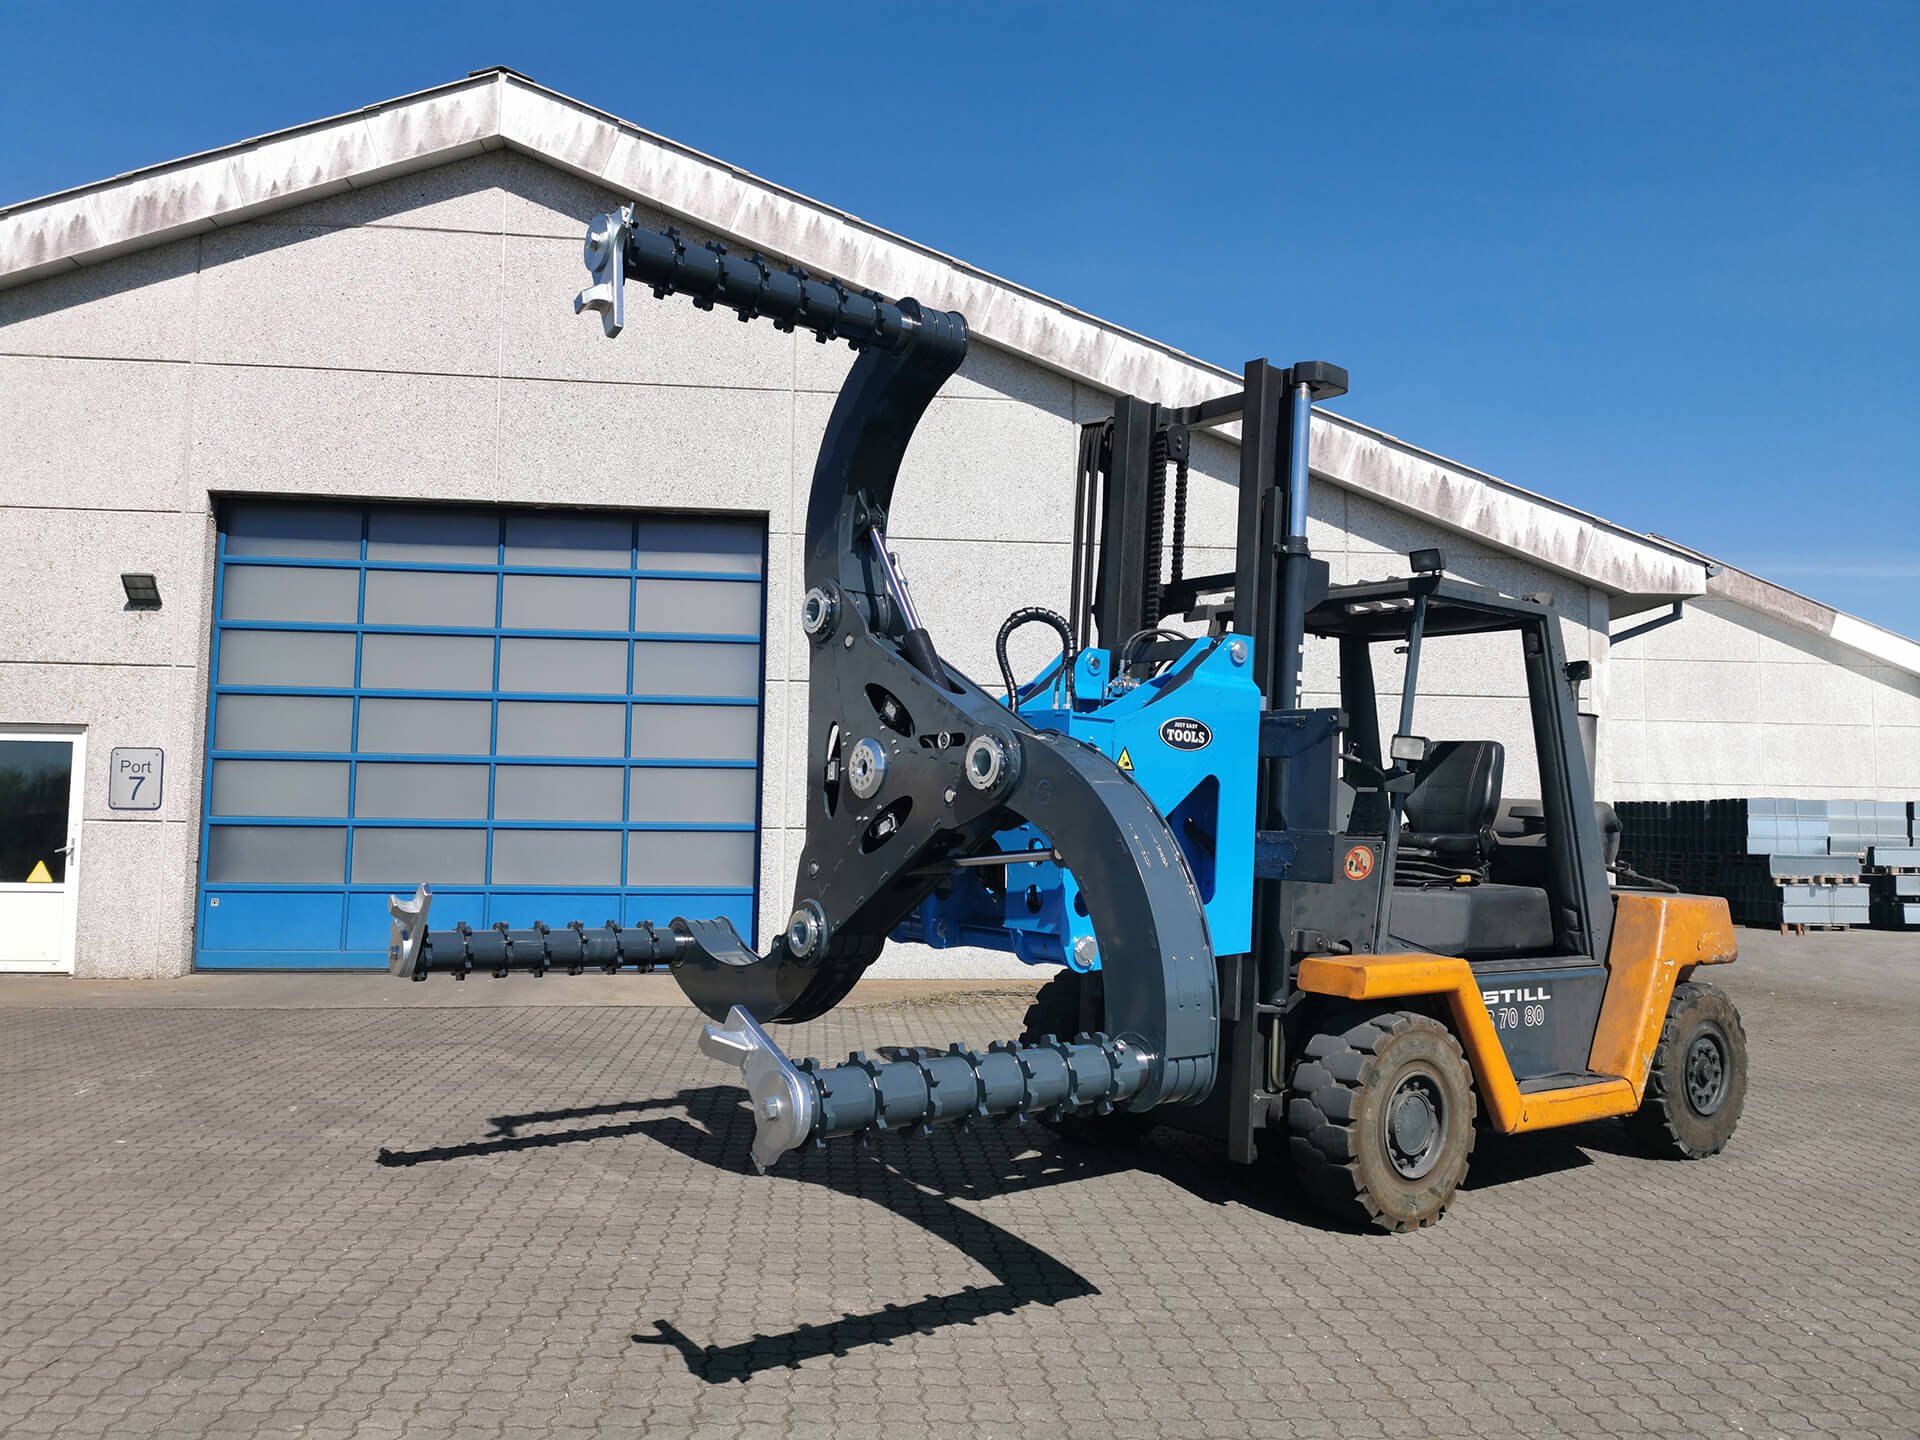 Easy Gripper 2800-3.2T handles OTR tyres up to 3.2 ton